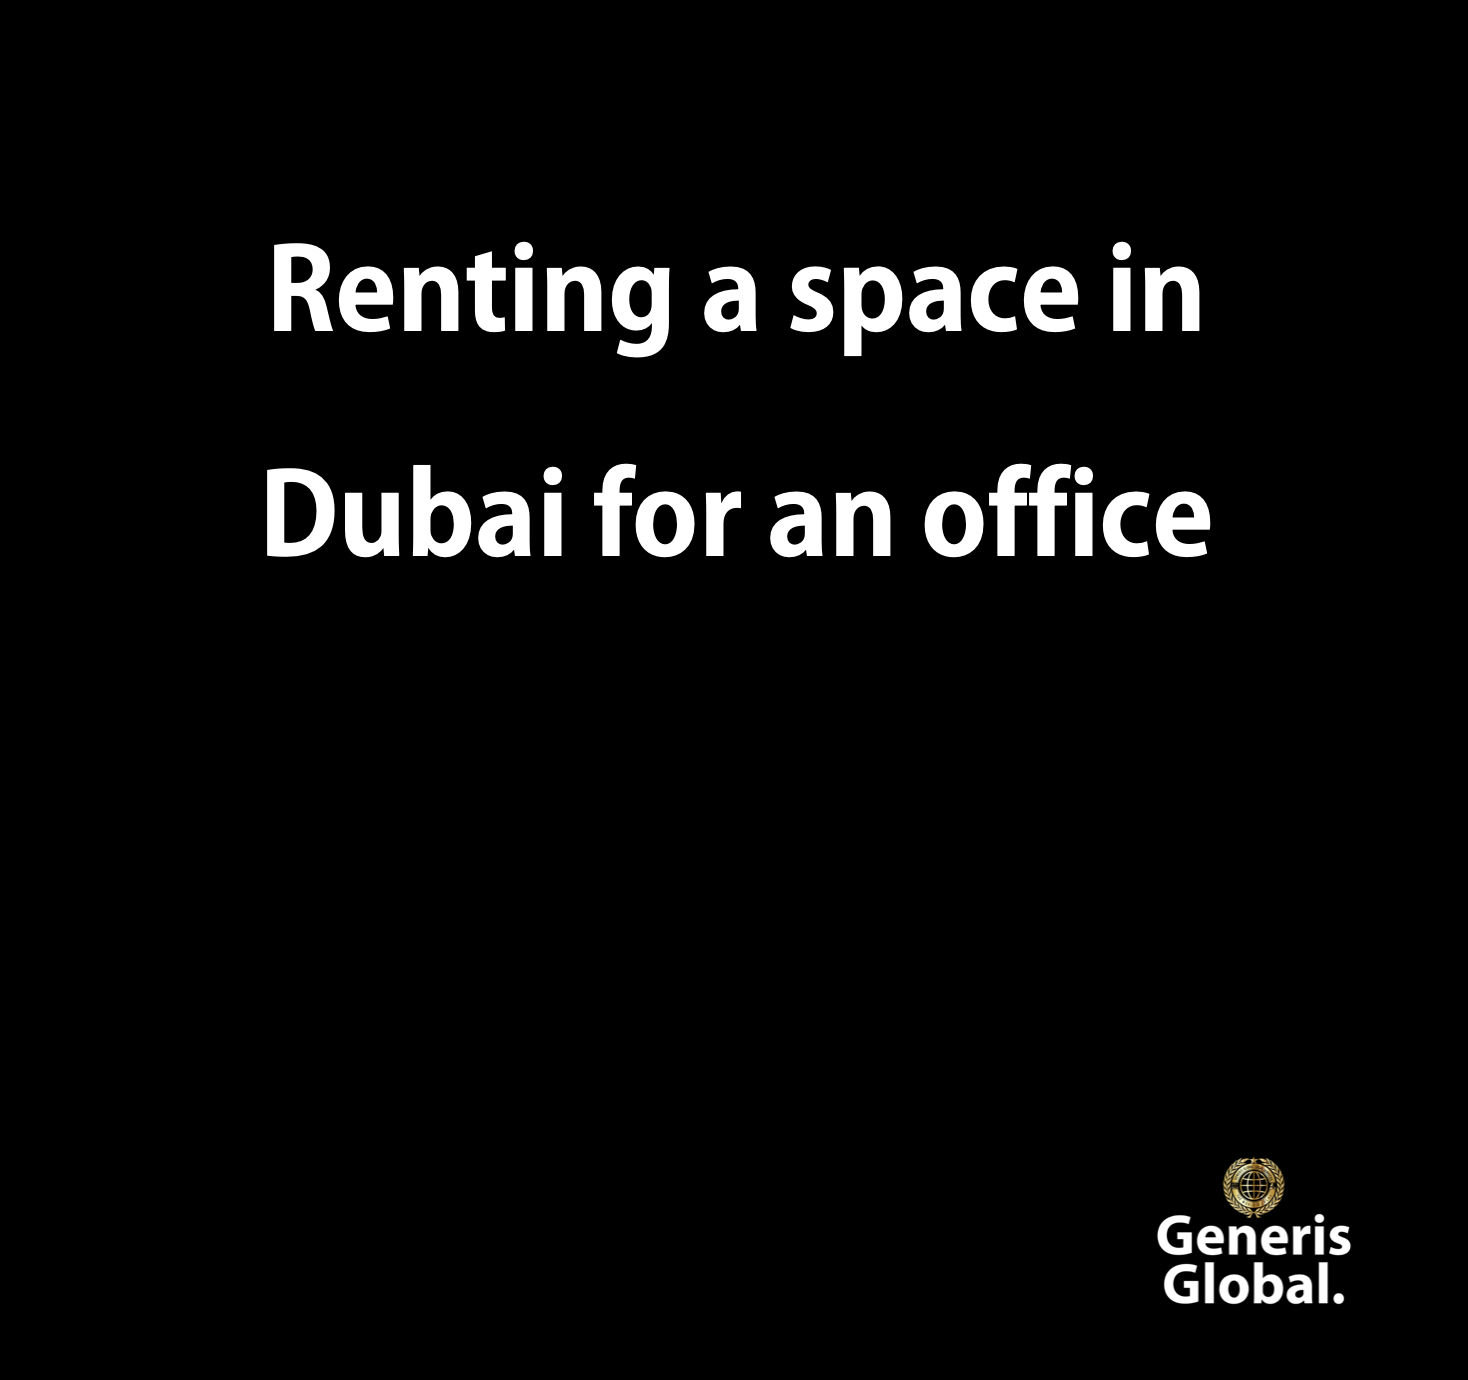 Renting a space in Dubai for an office